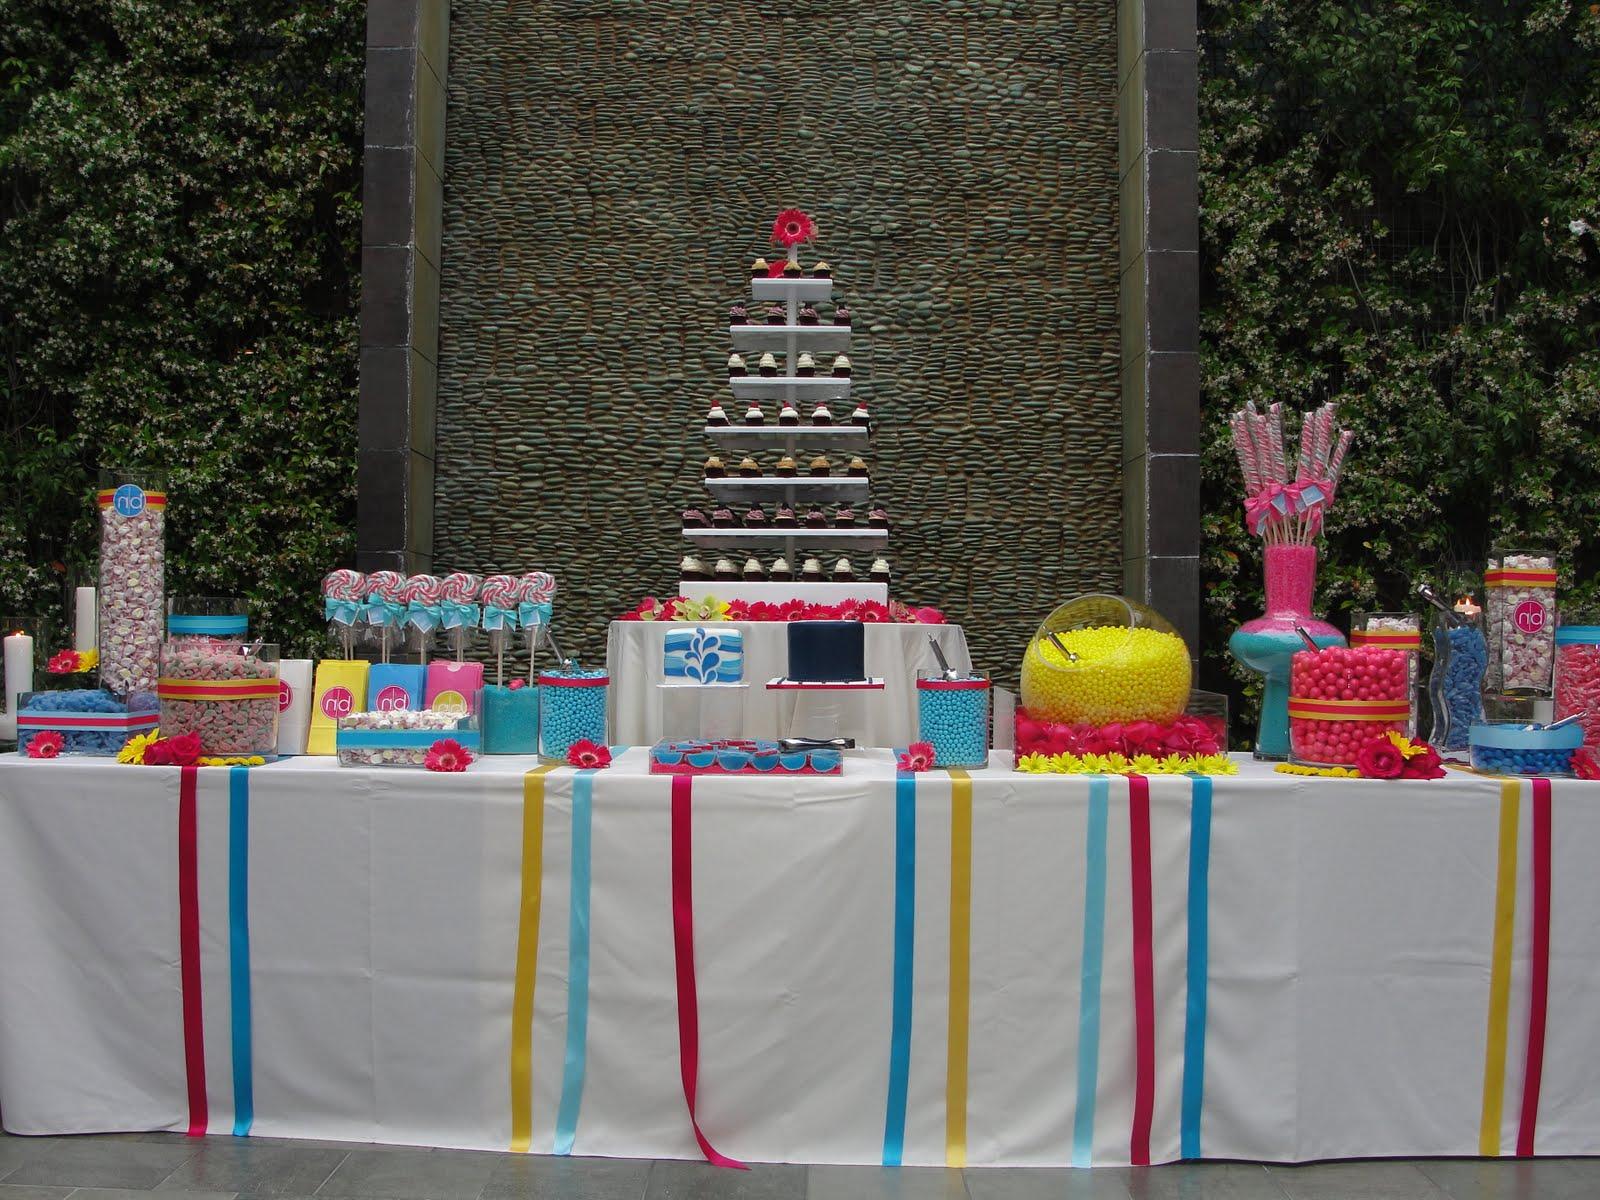 dessert candy table ever!